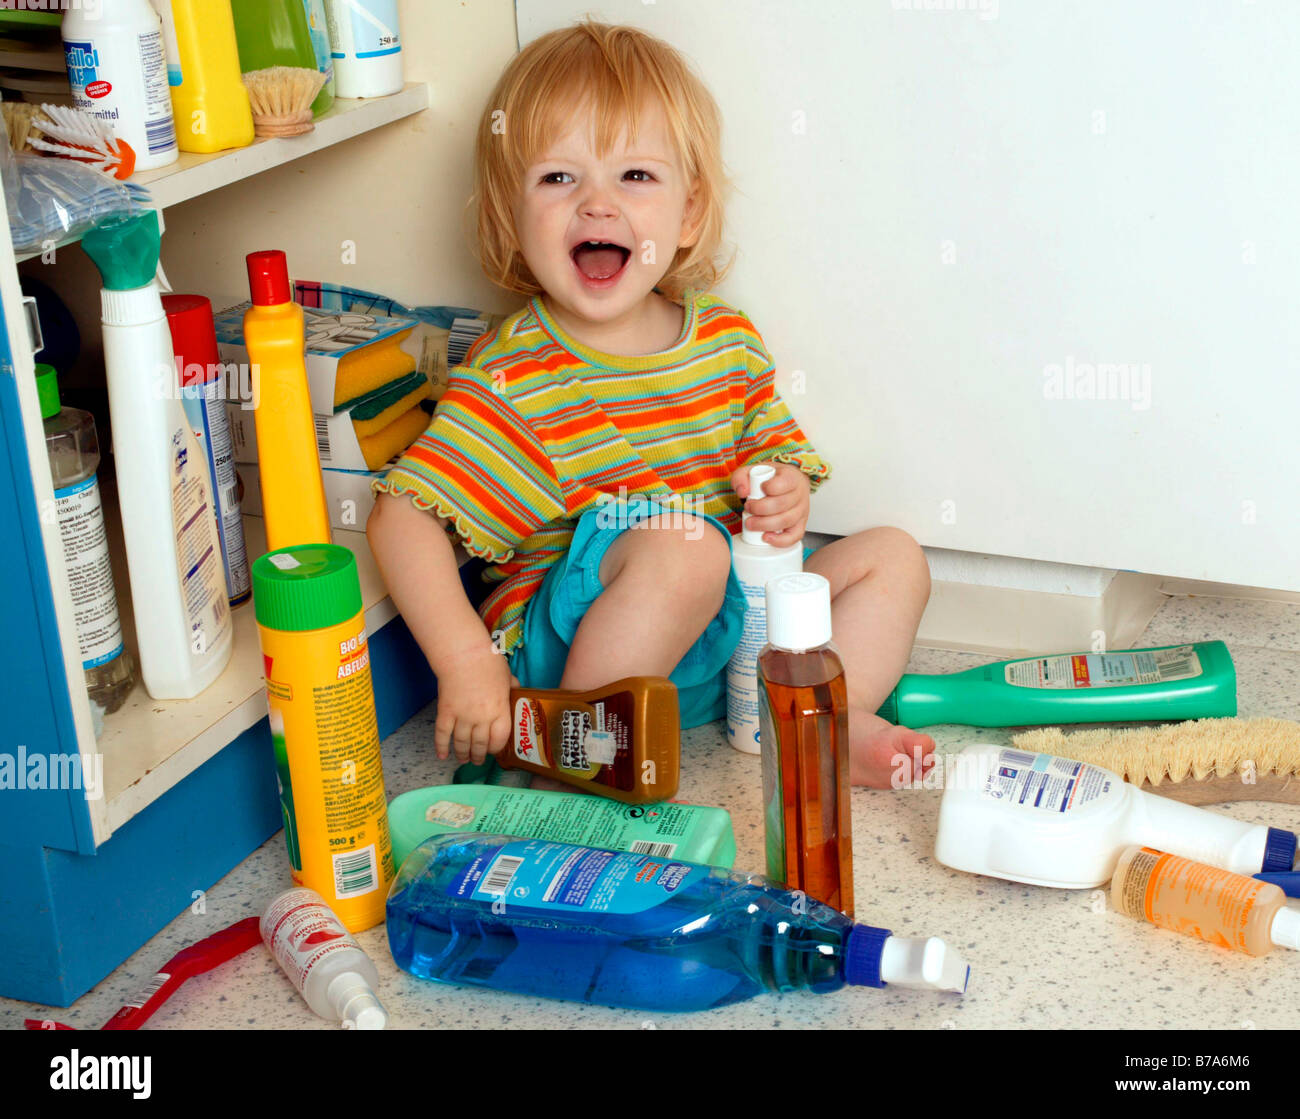 Toddler playing with cleaning agents Stock Photo